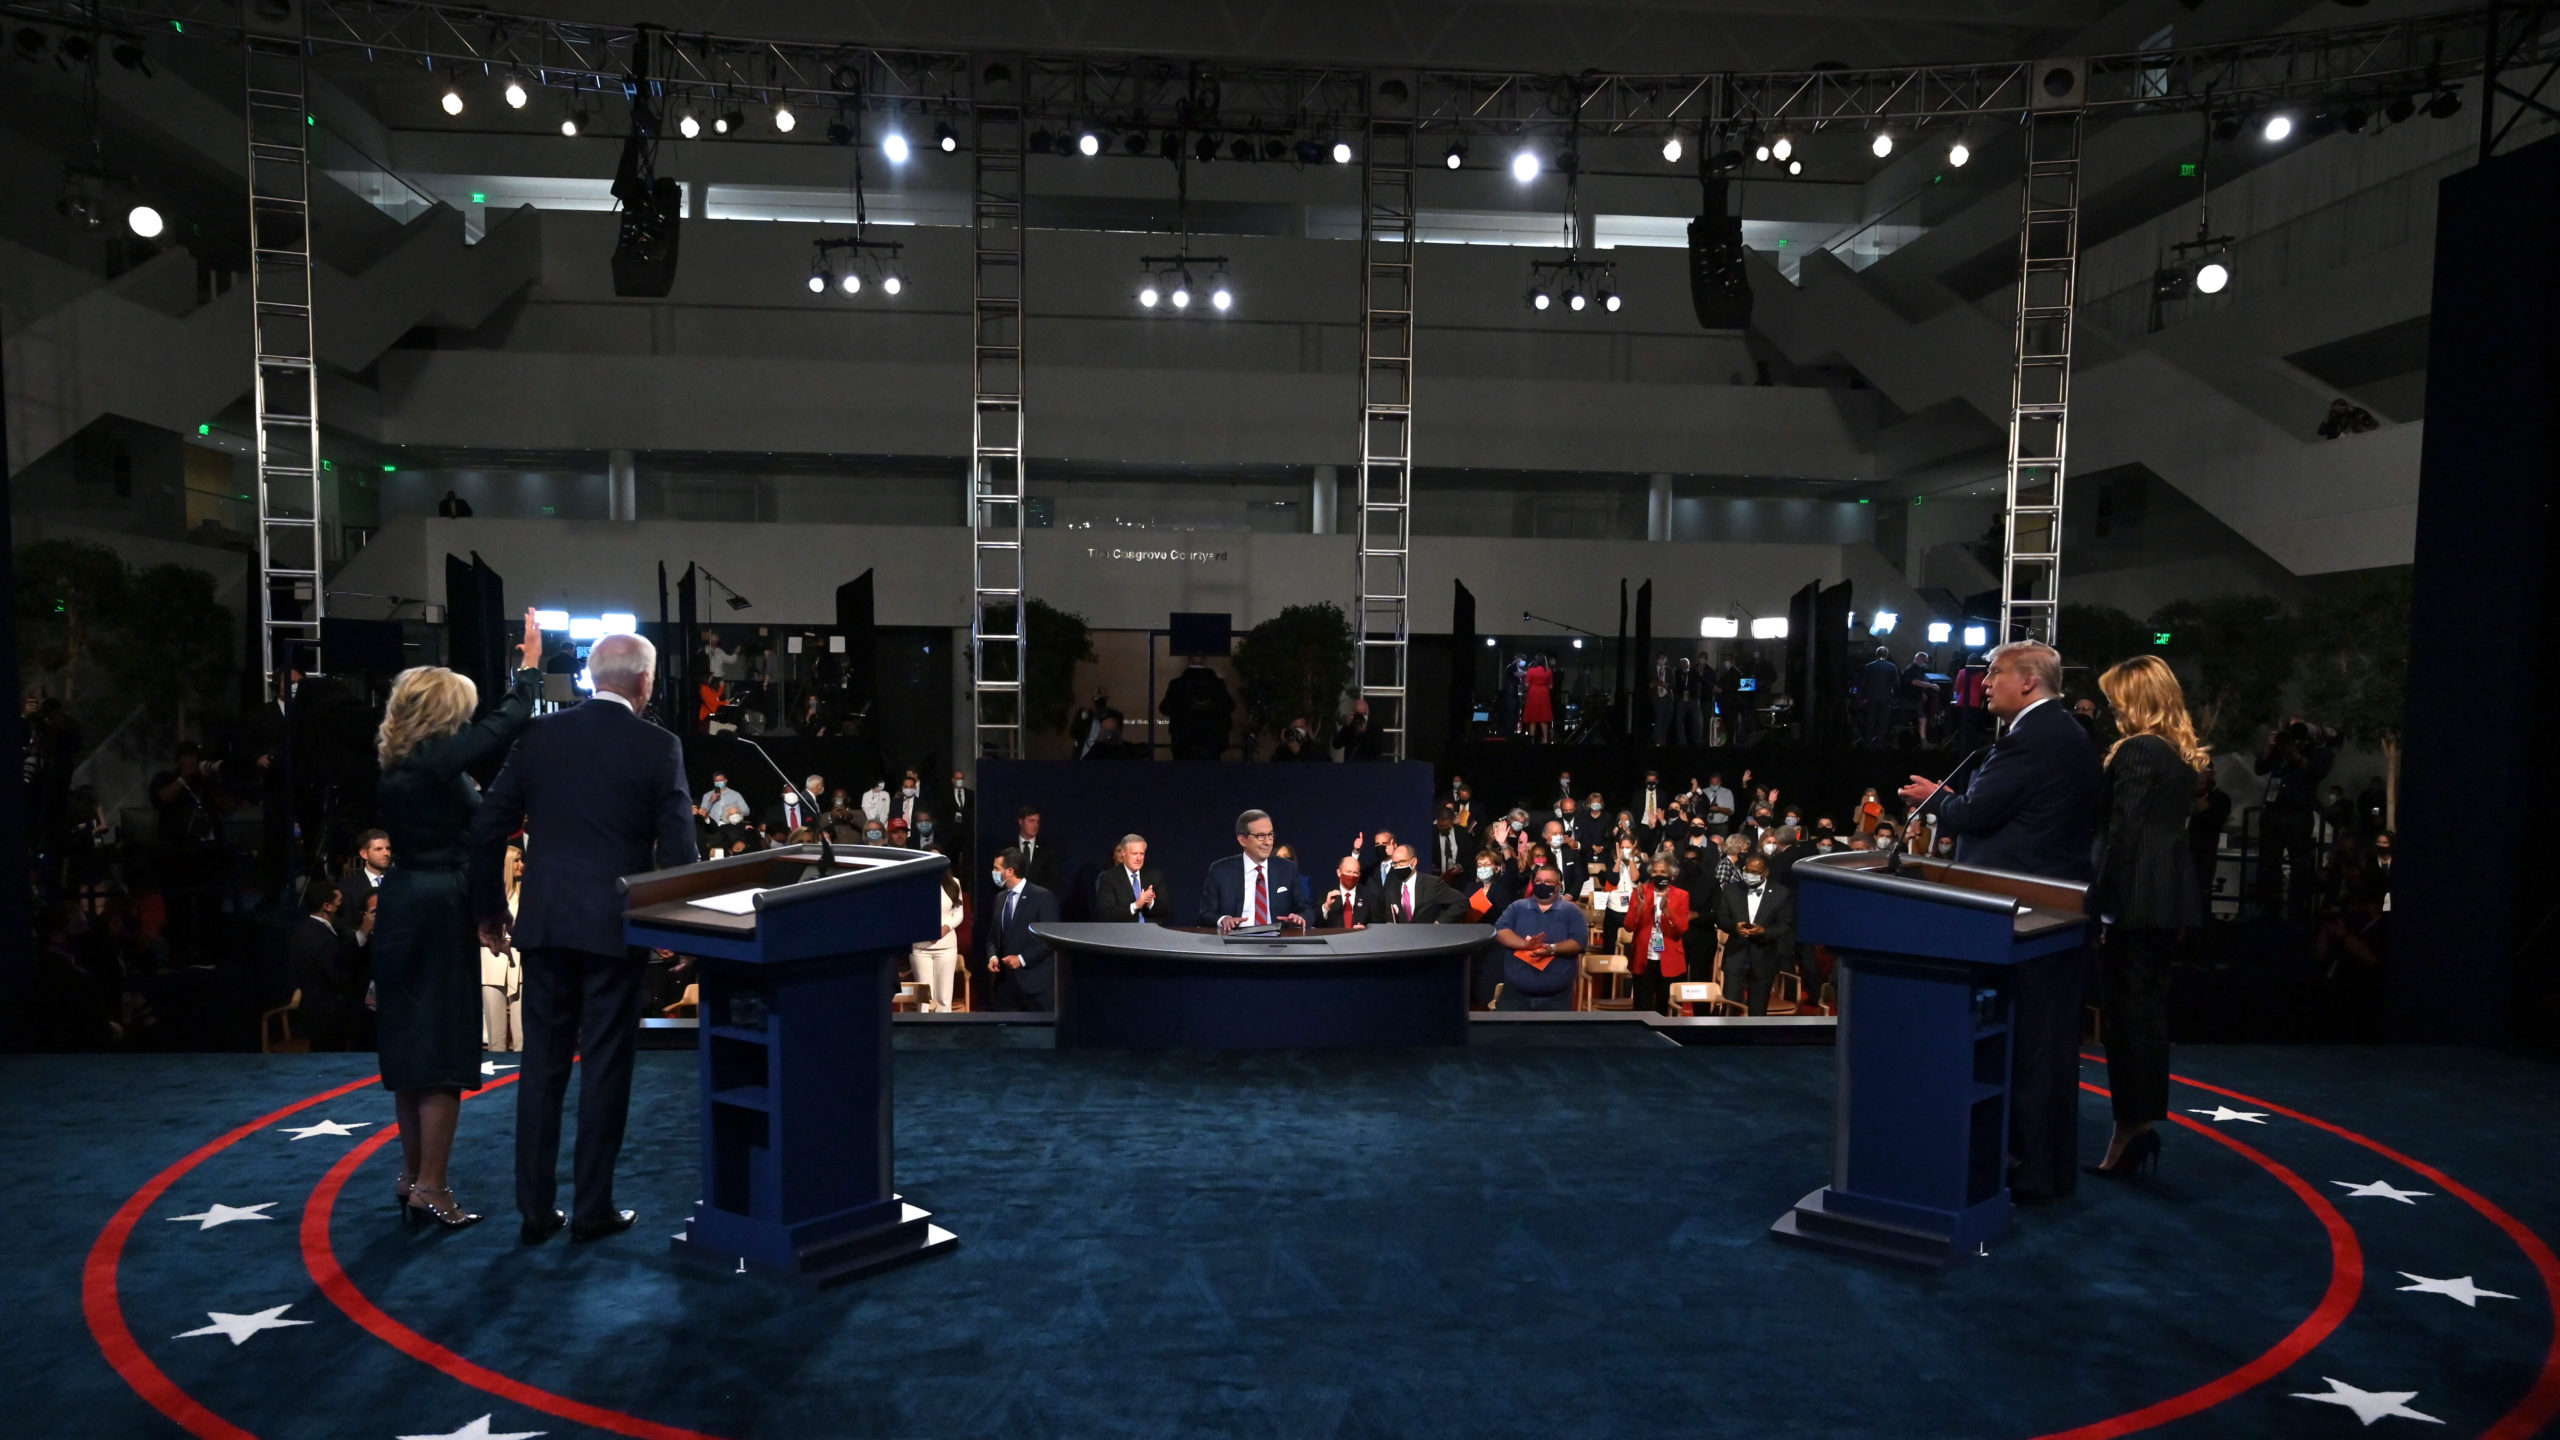 Democratic presidential nominee Joe Biden and his wife Dr. Jill Biden (L) stand on stage with U.S. President Donald Trump and First Lady Melania Trump (R) and moderator Chris Wallace after the first presidential debate (Photo: Olivier Douliery-Pool, Getty Images)